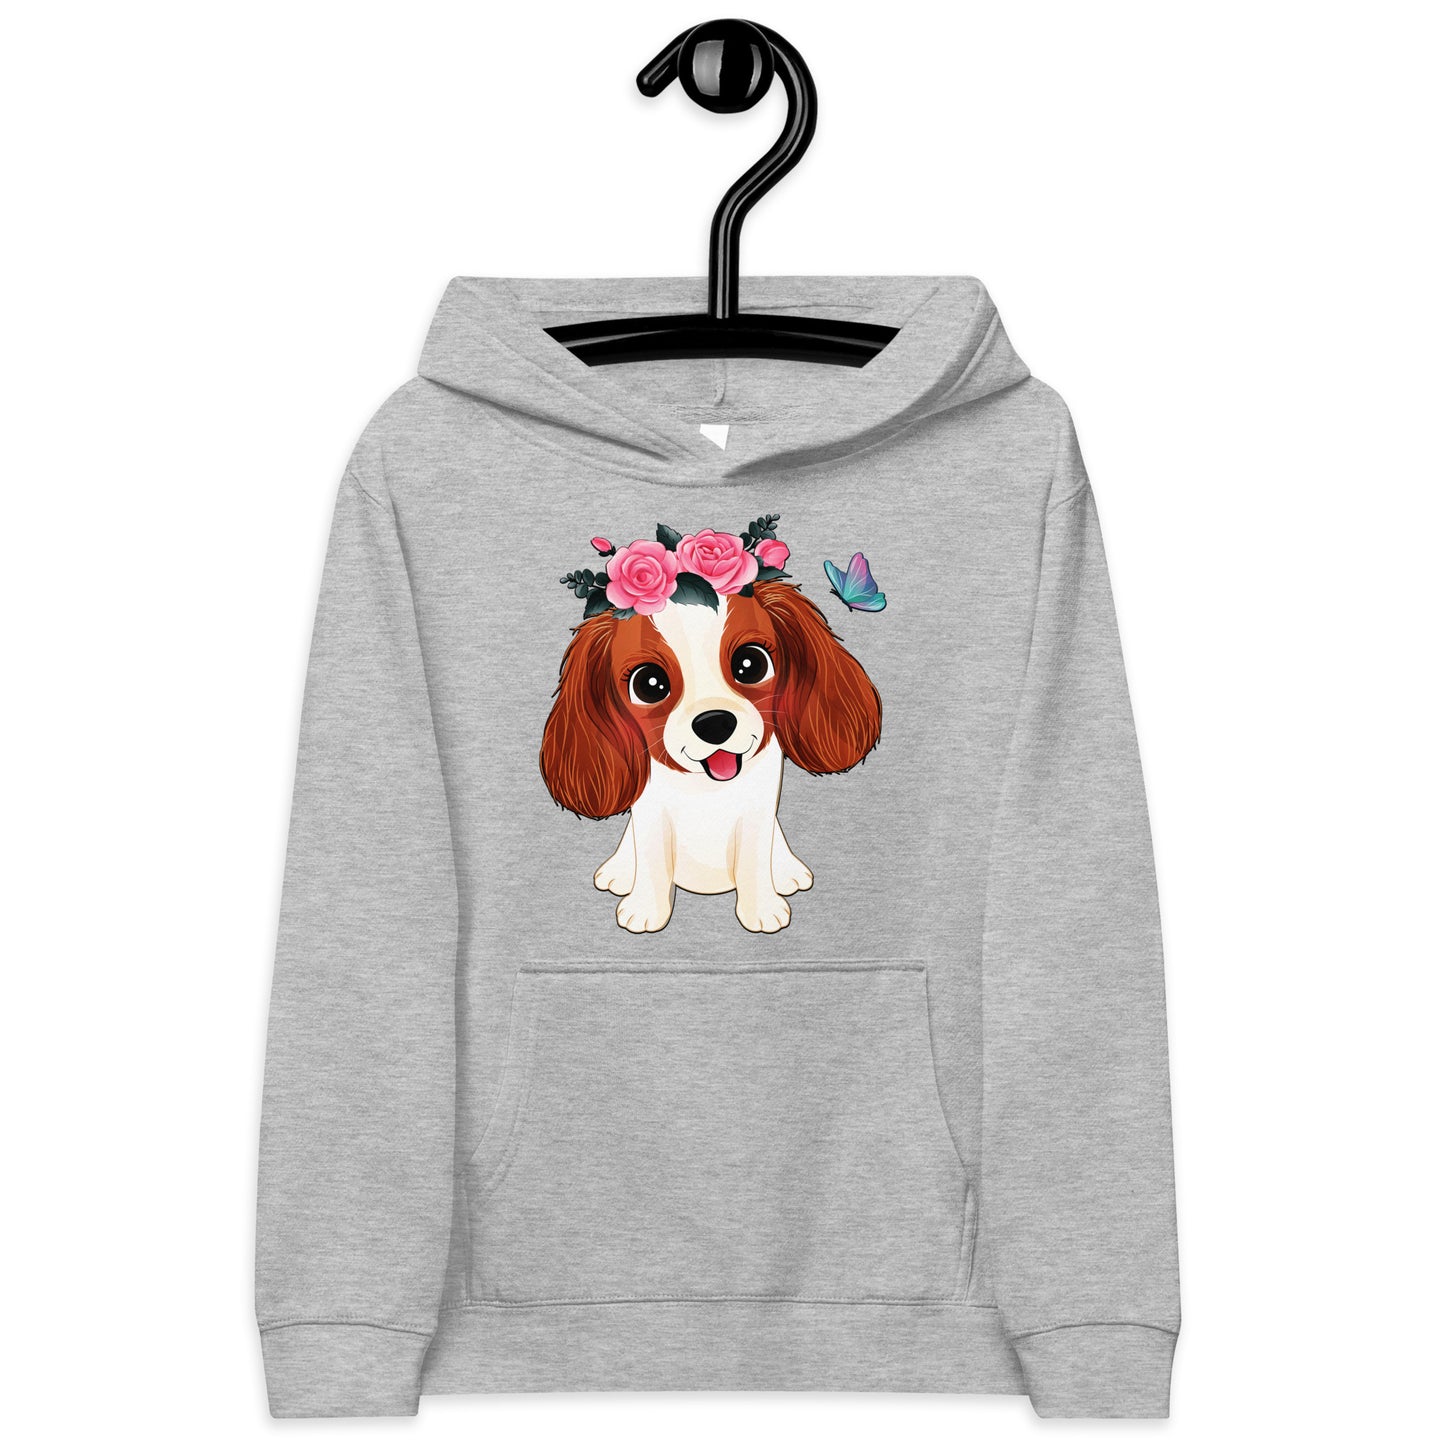 Cute Little Cavalier King Charles Dog with Flowers Hoodie, No. 0353